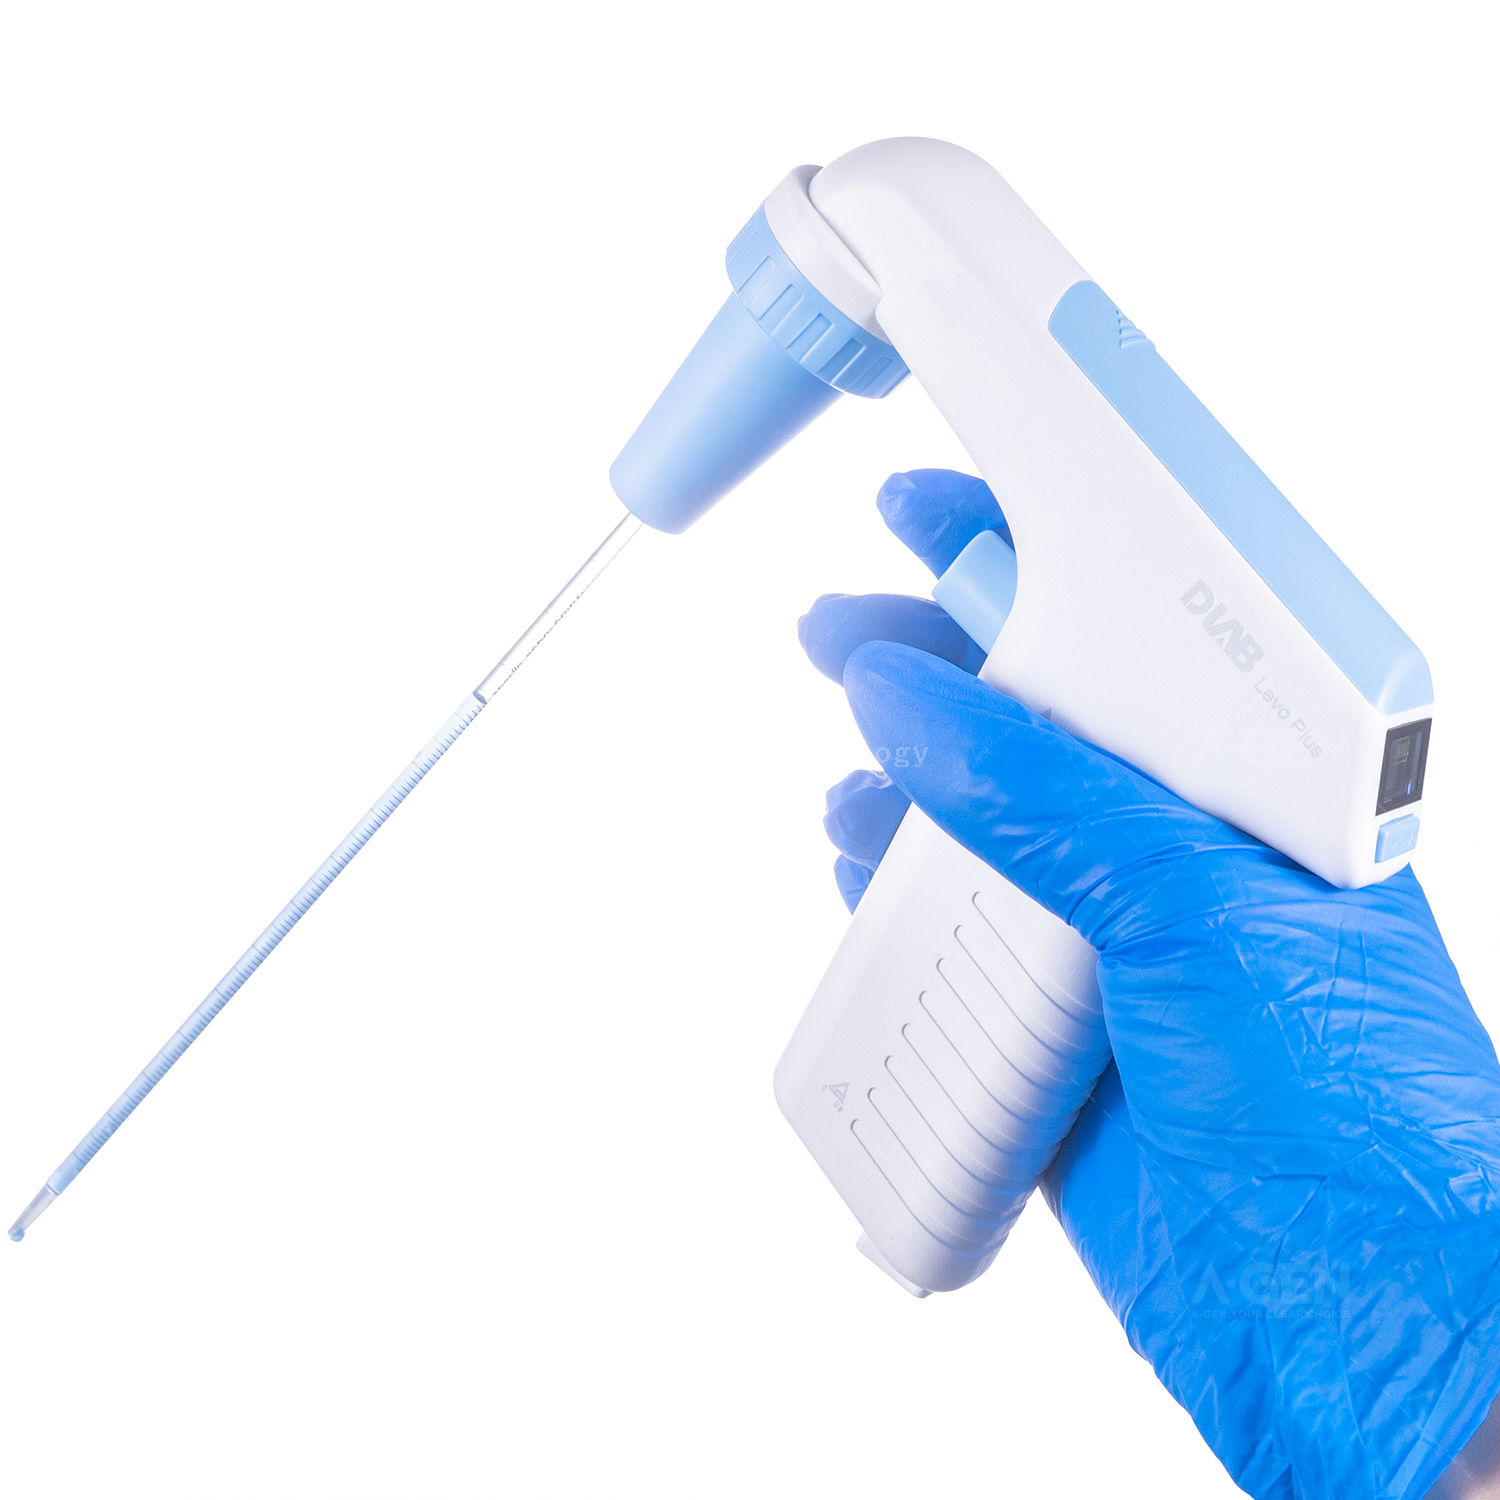 1ml Serological Pipette,sterile customized in Individual Paper Bag Or Polybag